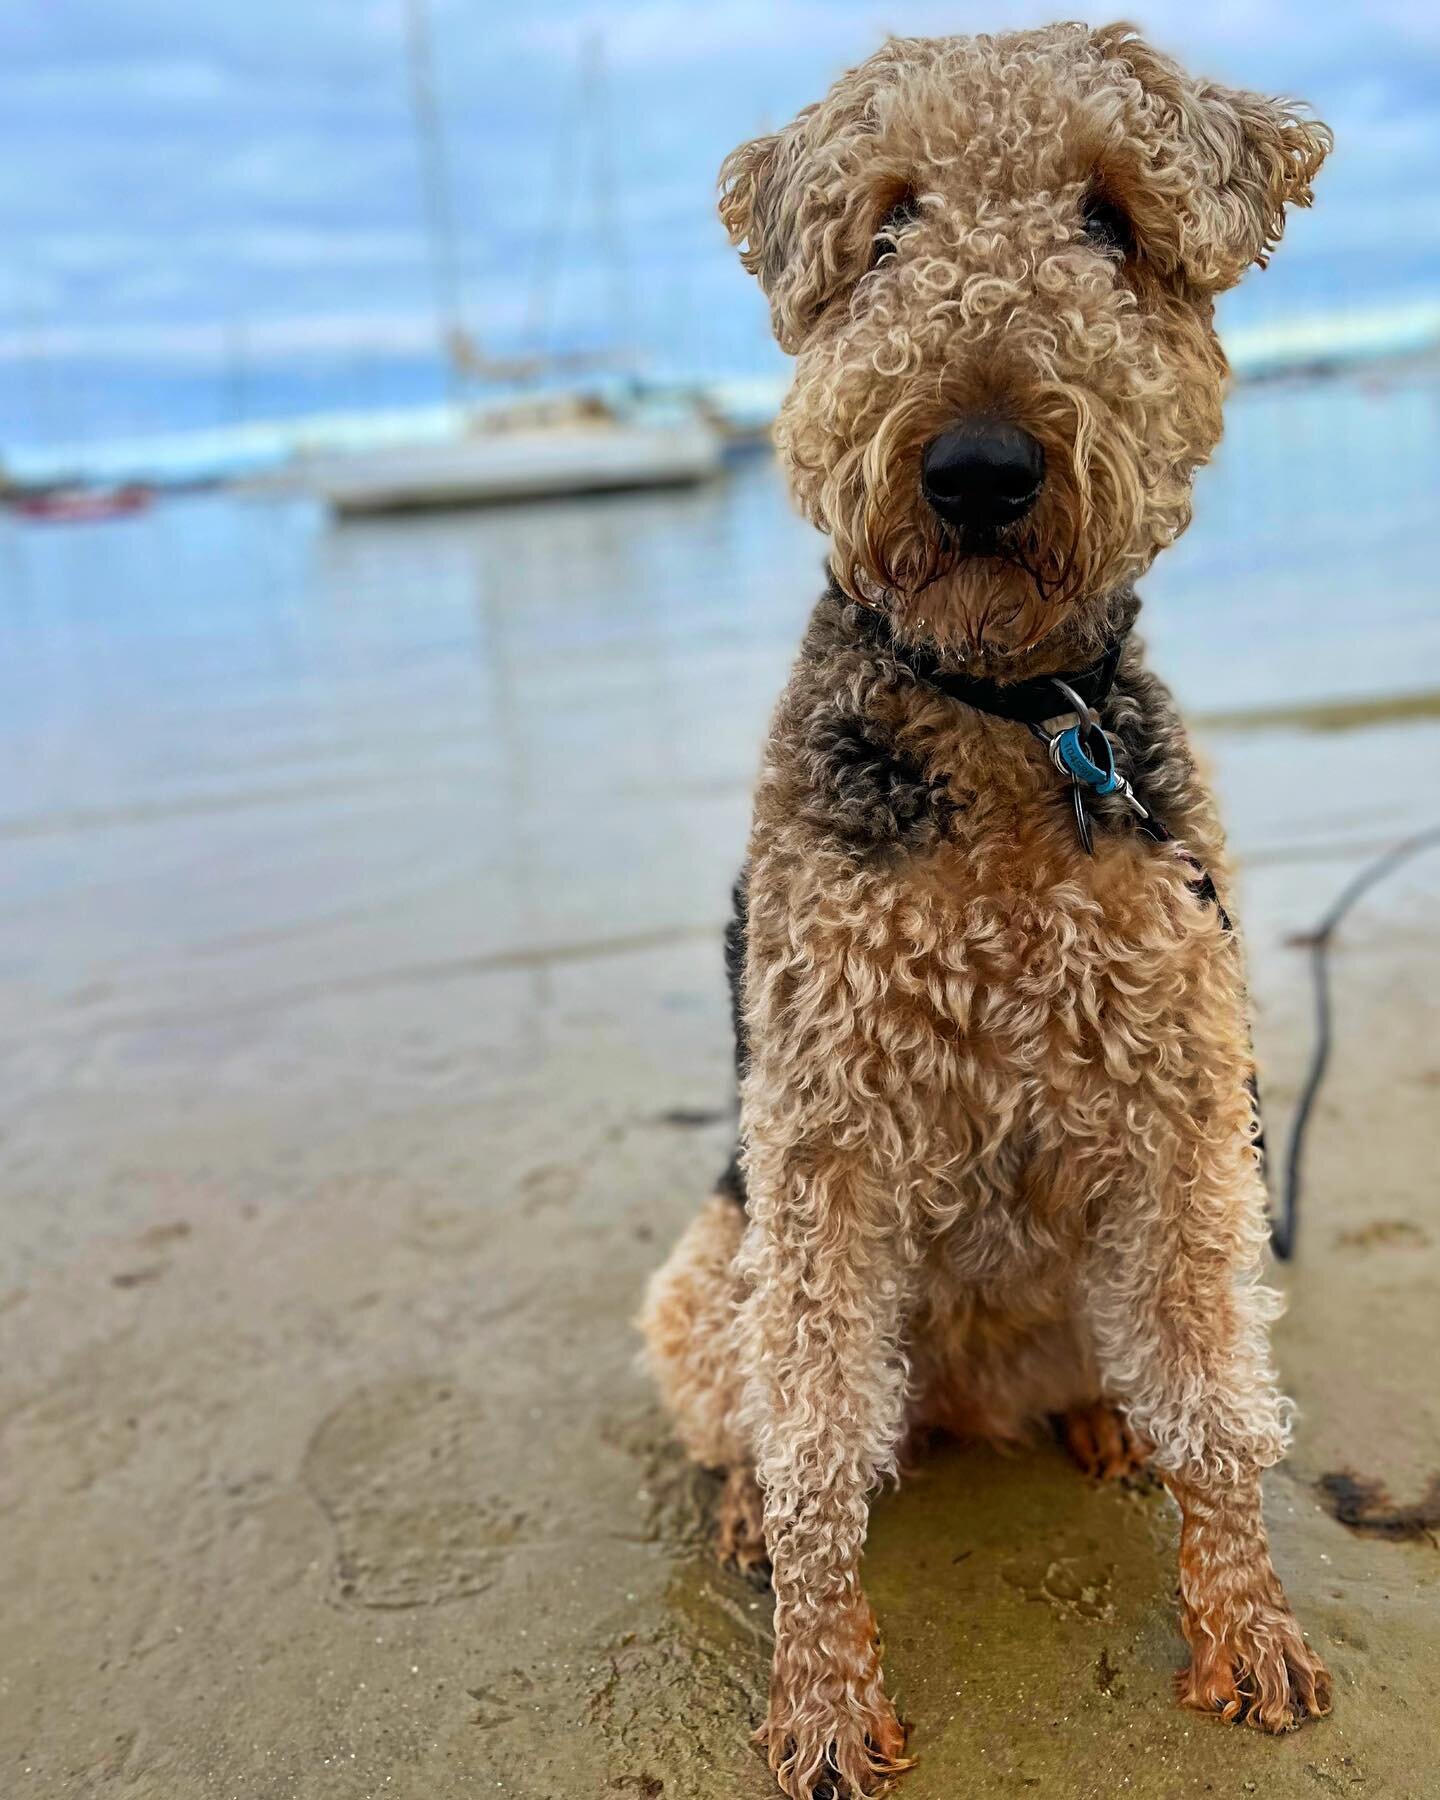 Wet paws are very in. 
.
.
.
.
#dogs #dogsofinstagram #dogsofmelbourne #airedale #airedaleterrier #airedalecommunity #airedalesofinstagram #airedalelove #dogphotography #dogphoto #dogwalkersofmelbourne #dogwalker #dogwalking #middlepark